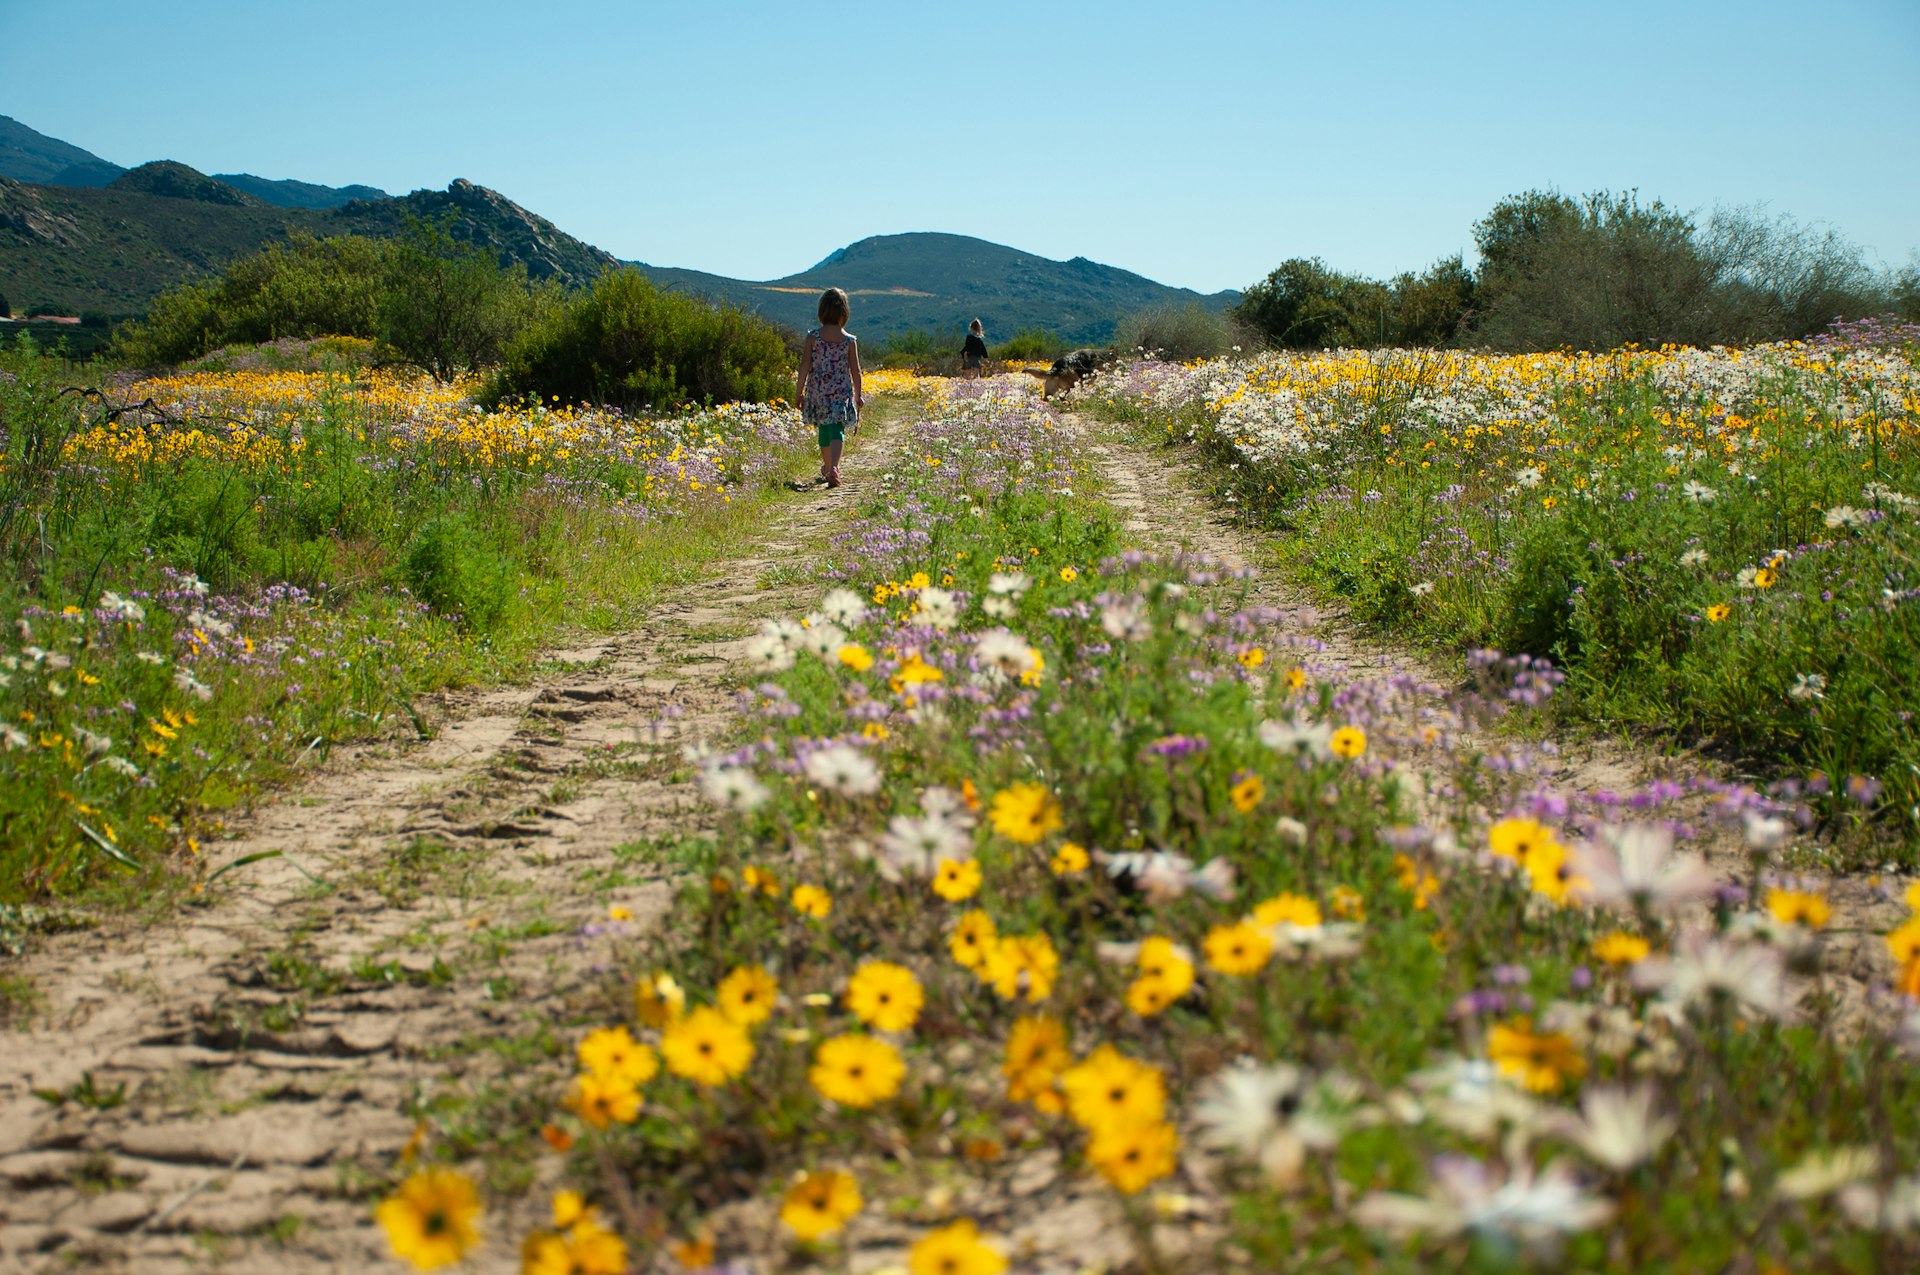 A child follows a dirt track through a field in bloom with many different wildflowers